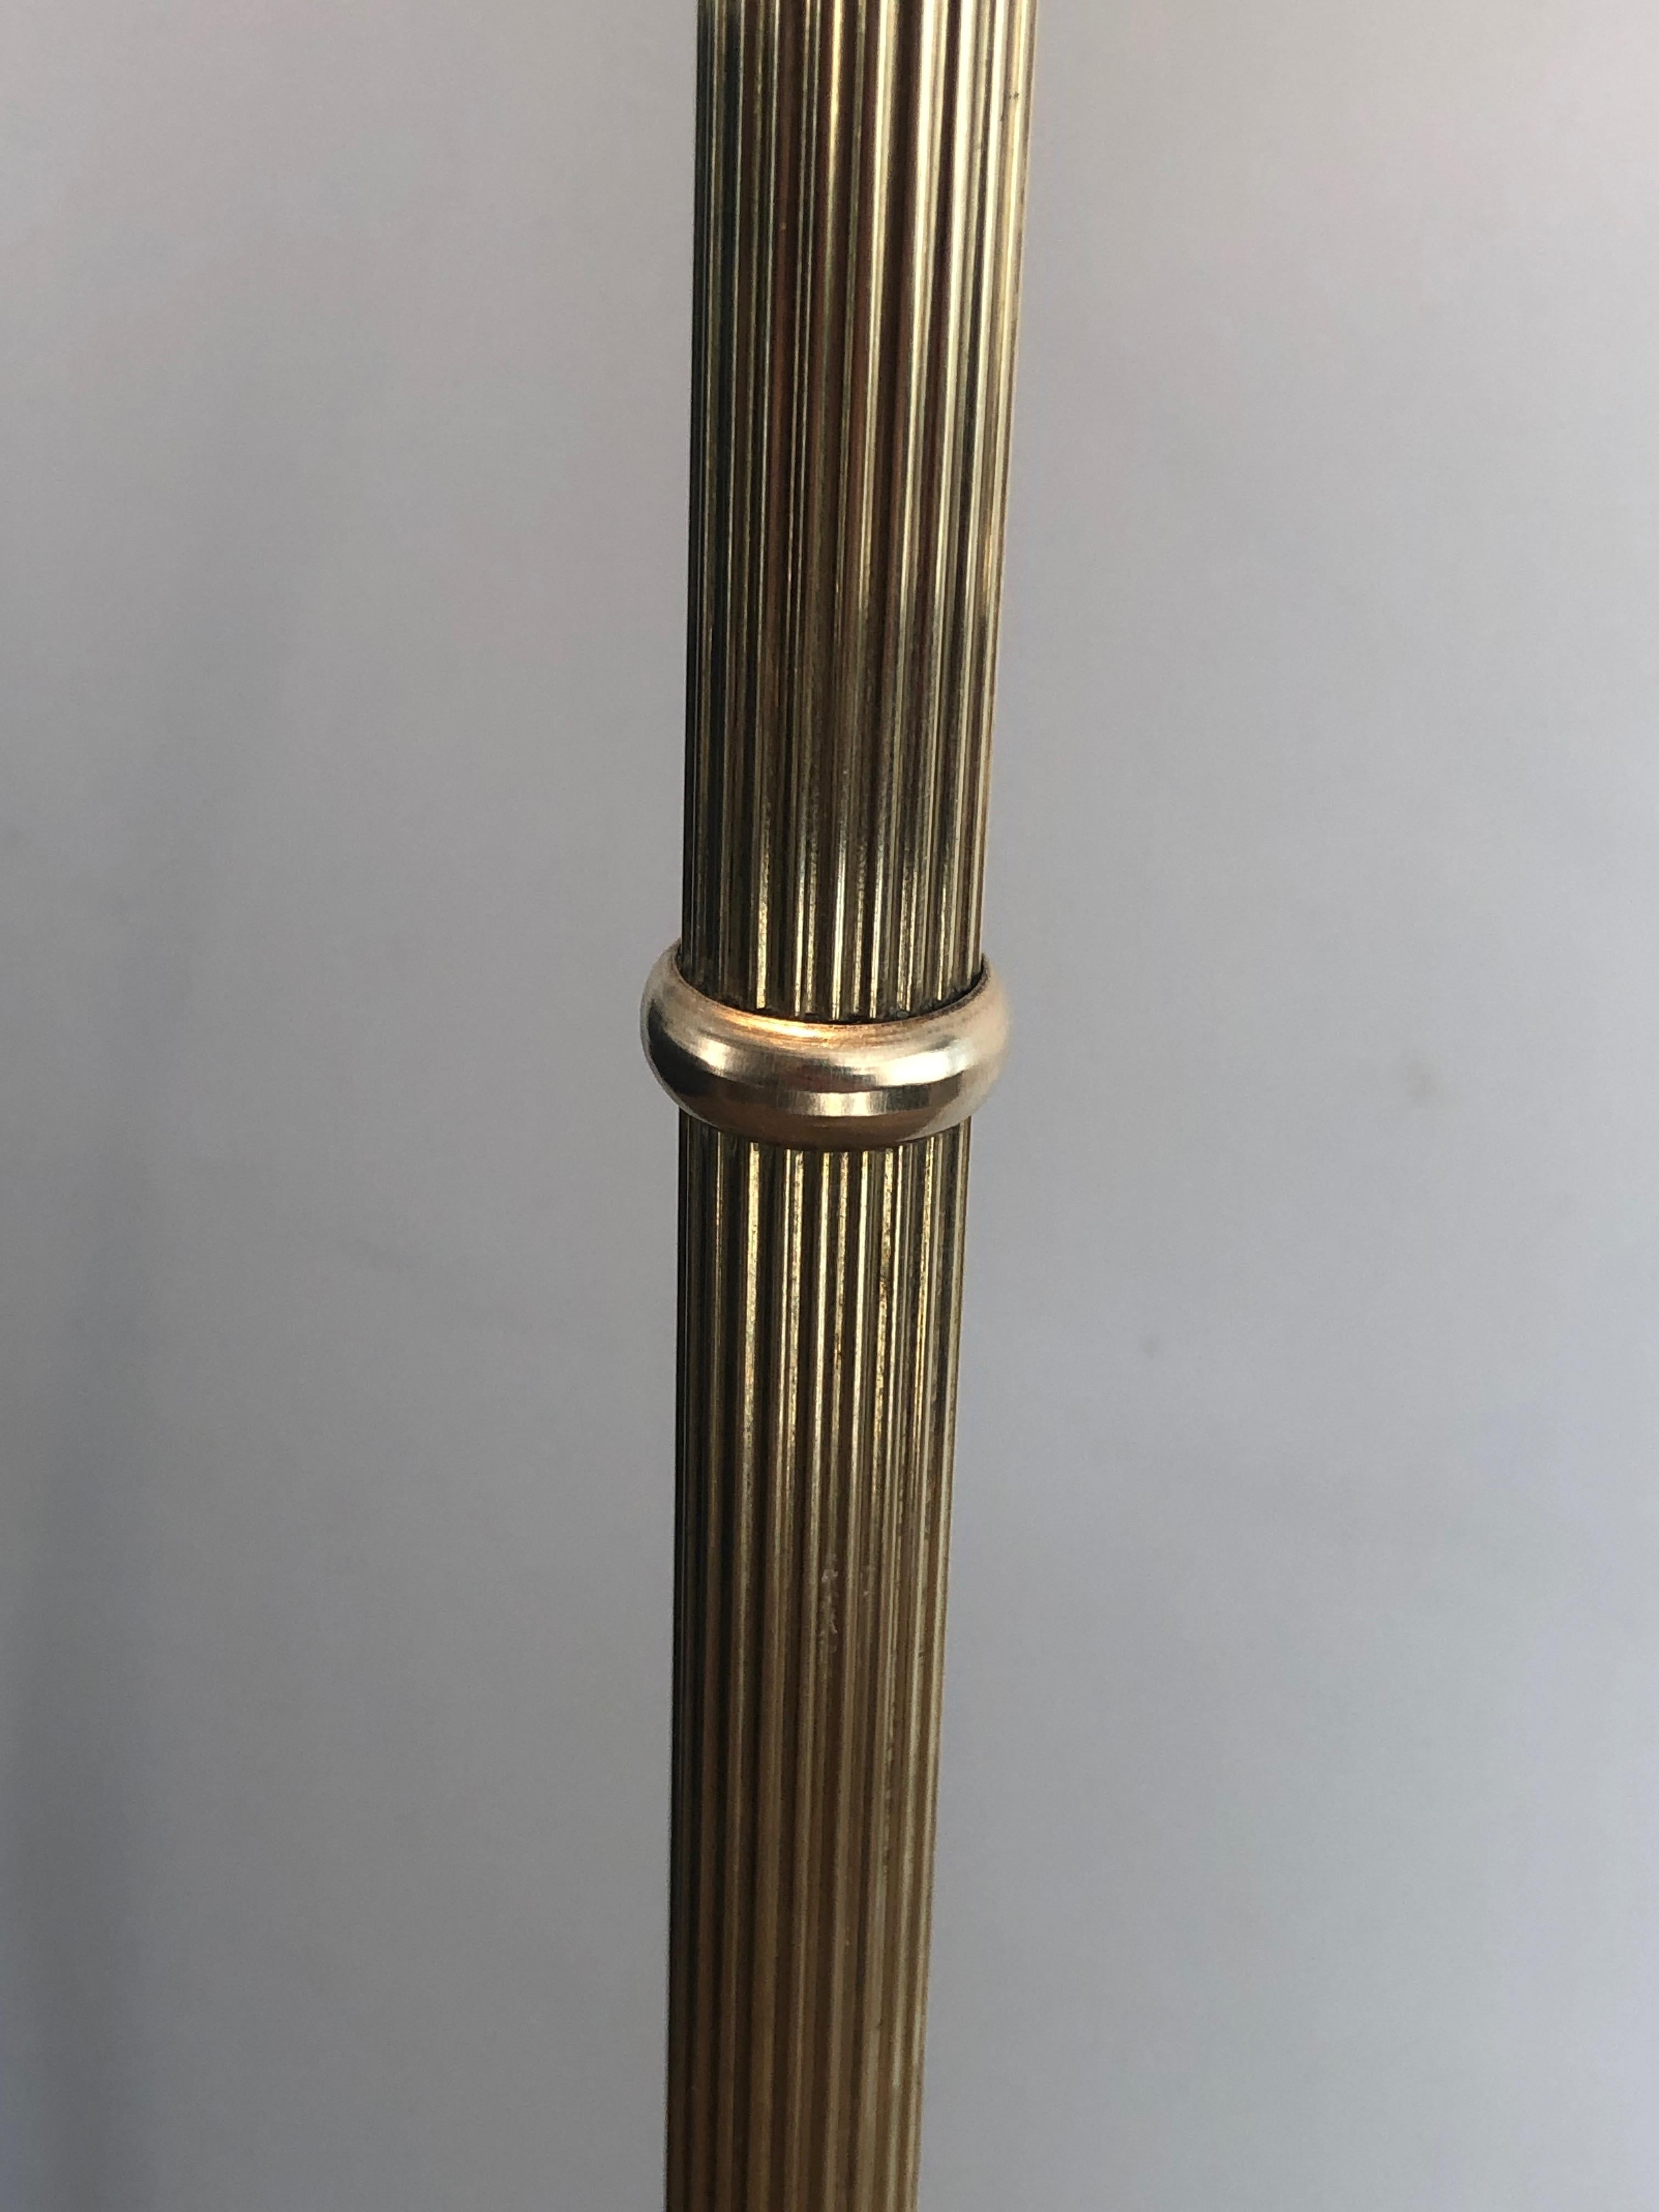 Tripode Brass Floor Lamp with 3 Arms, French Work by Maison Jansen For Sale 11